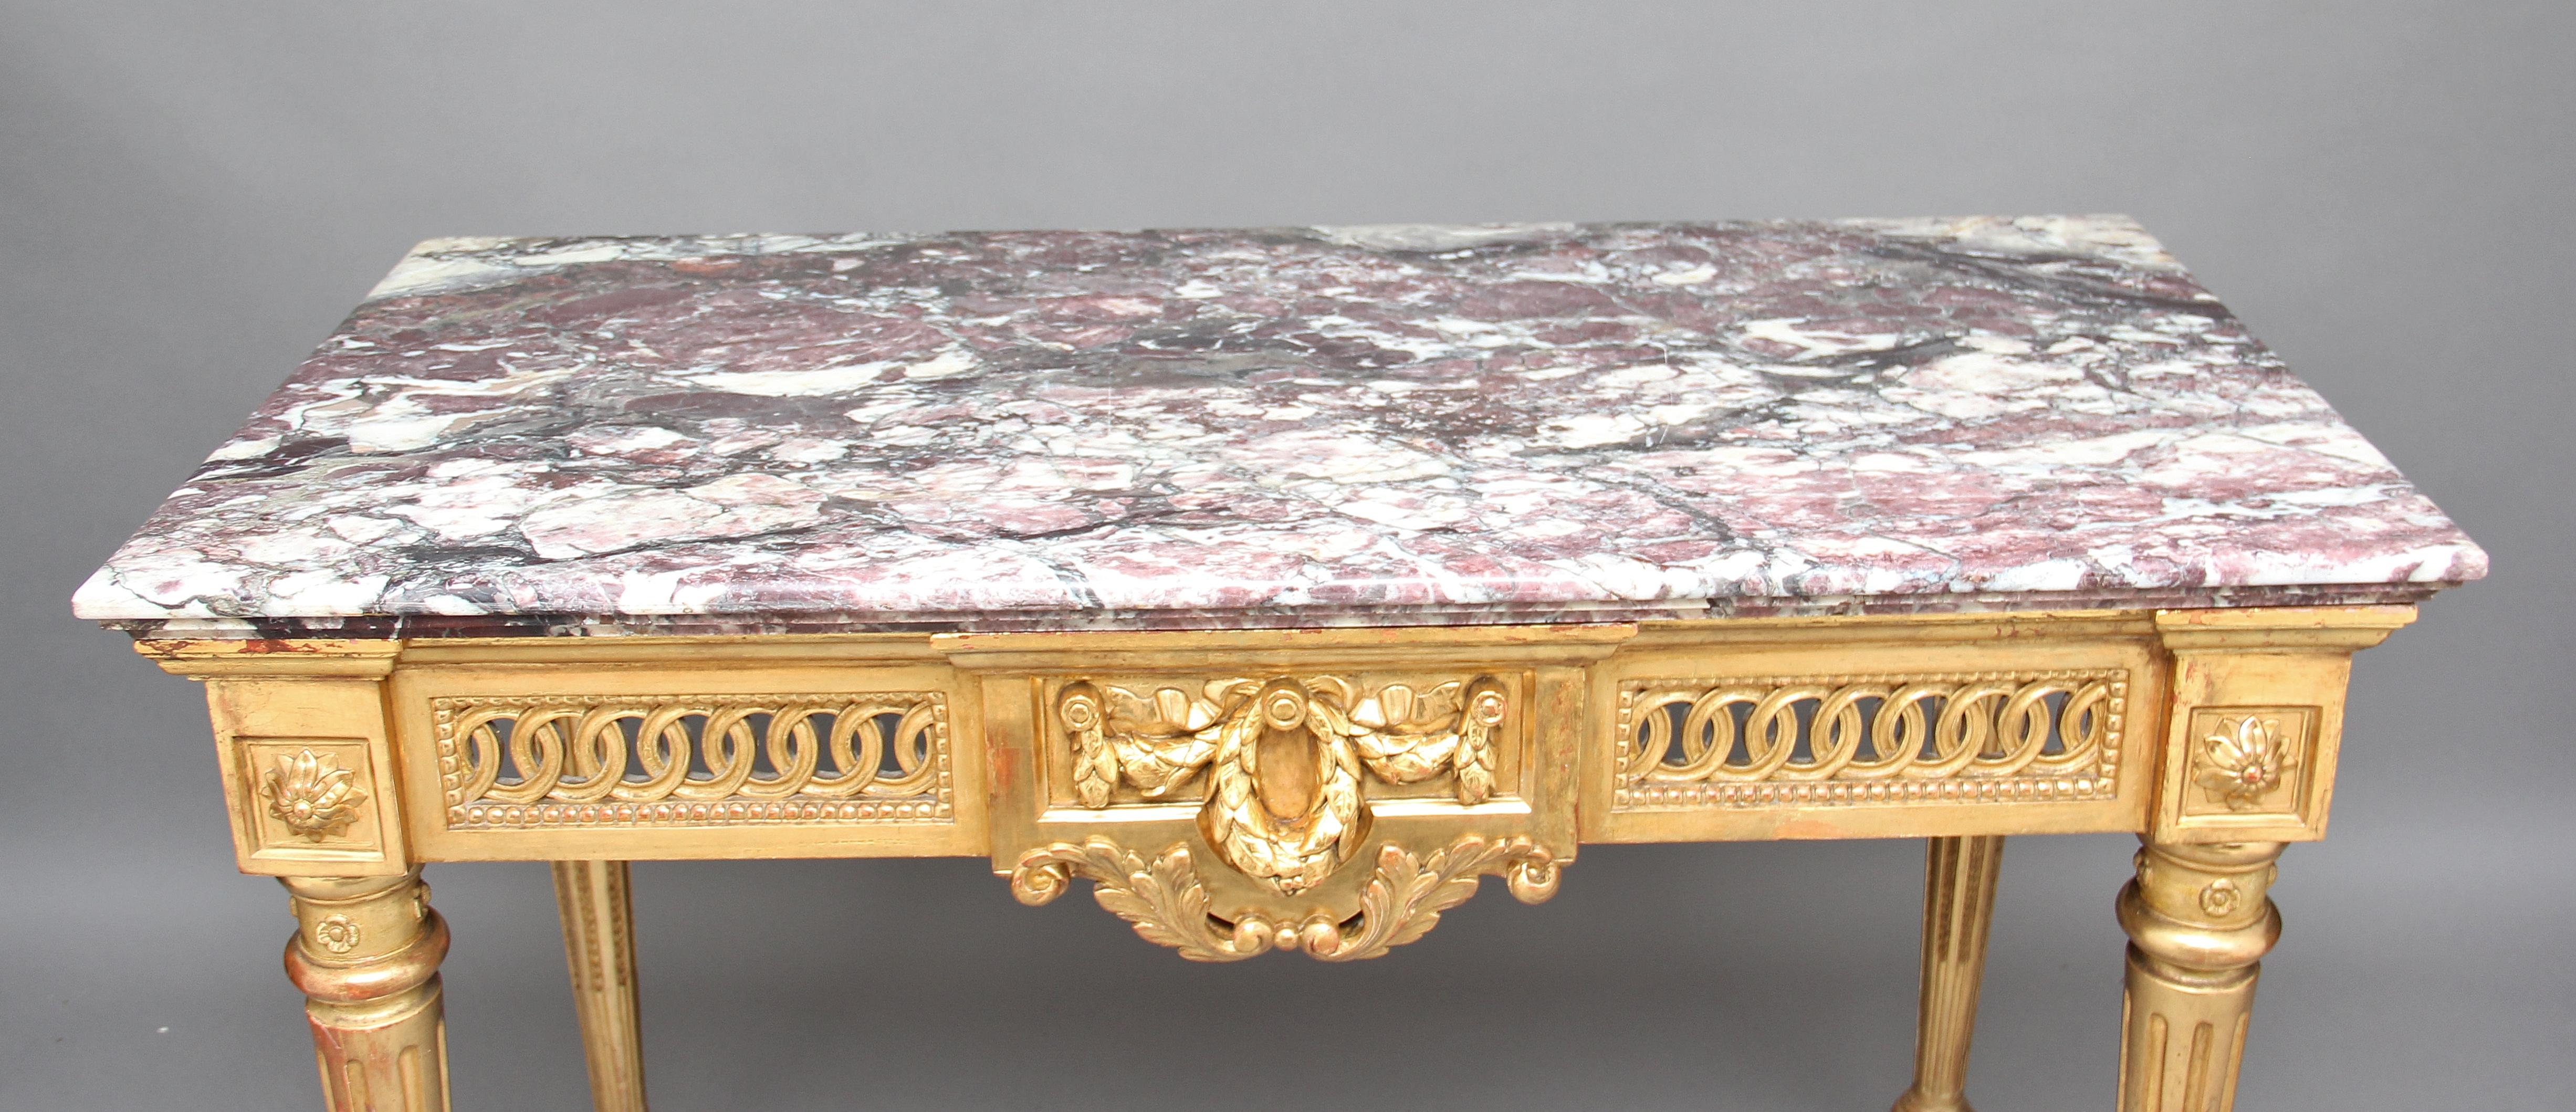 Giltwood 19th Century Carved and Gilt Marble Top Console Table